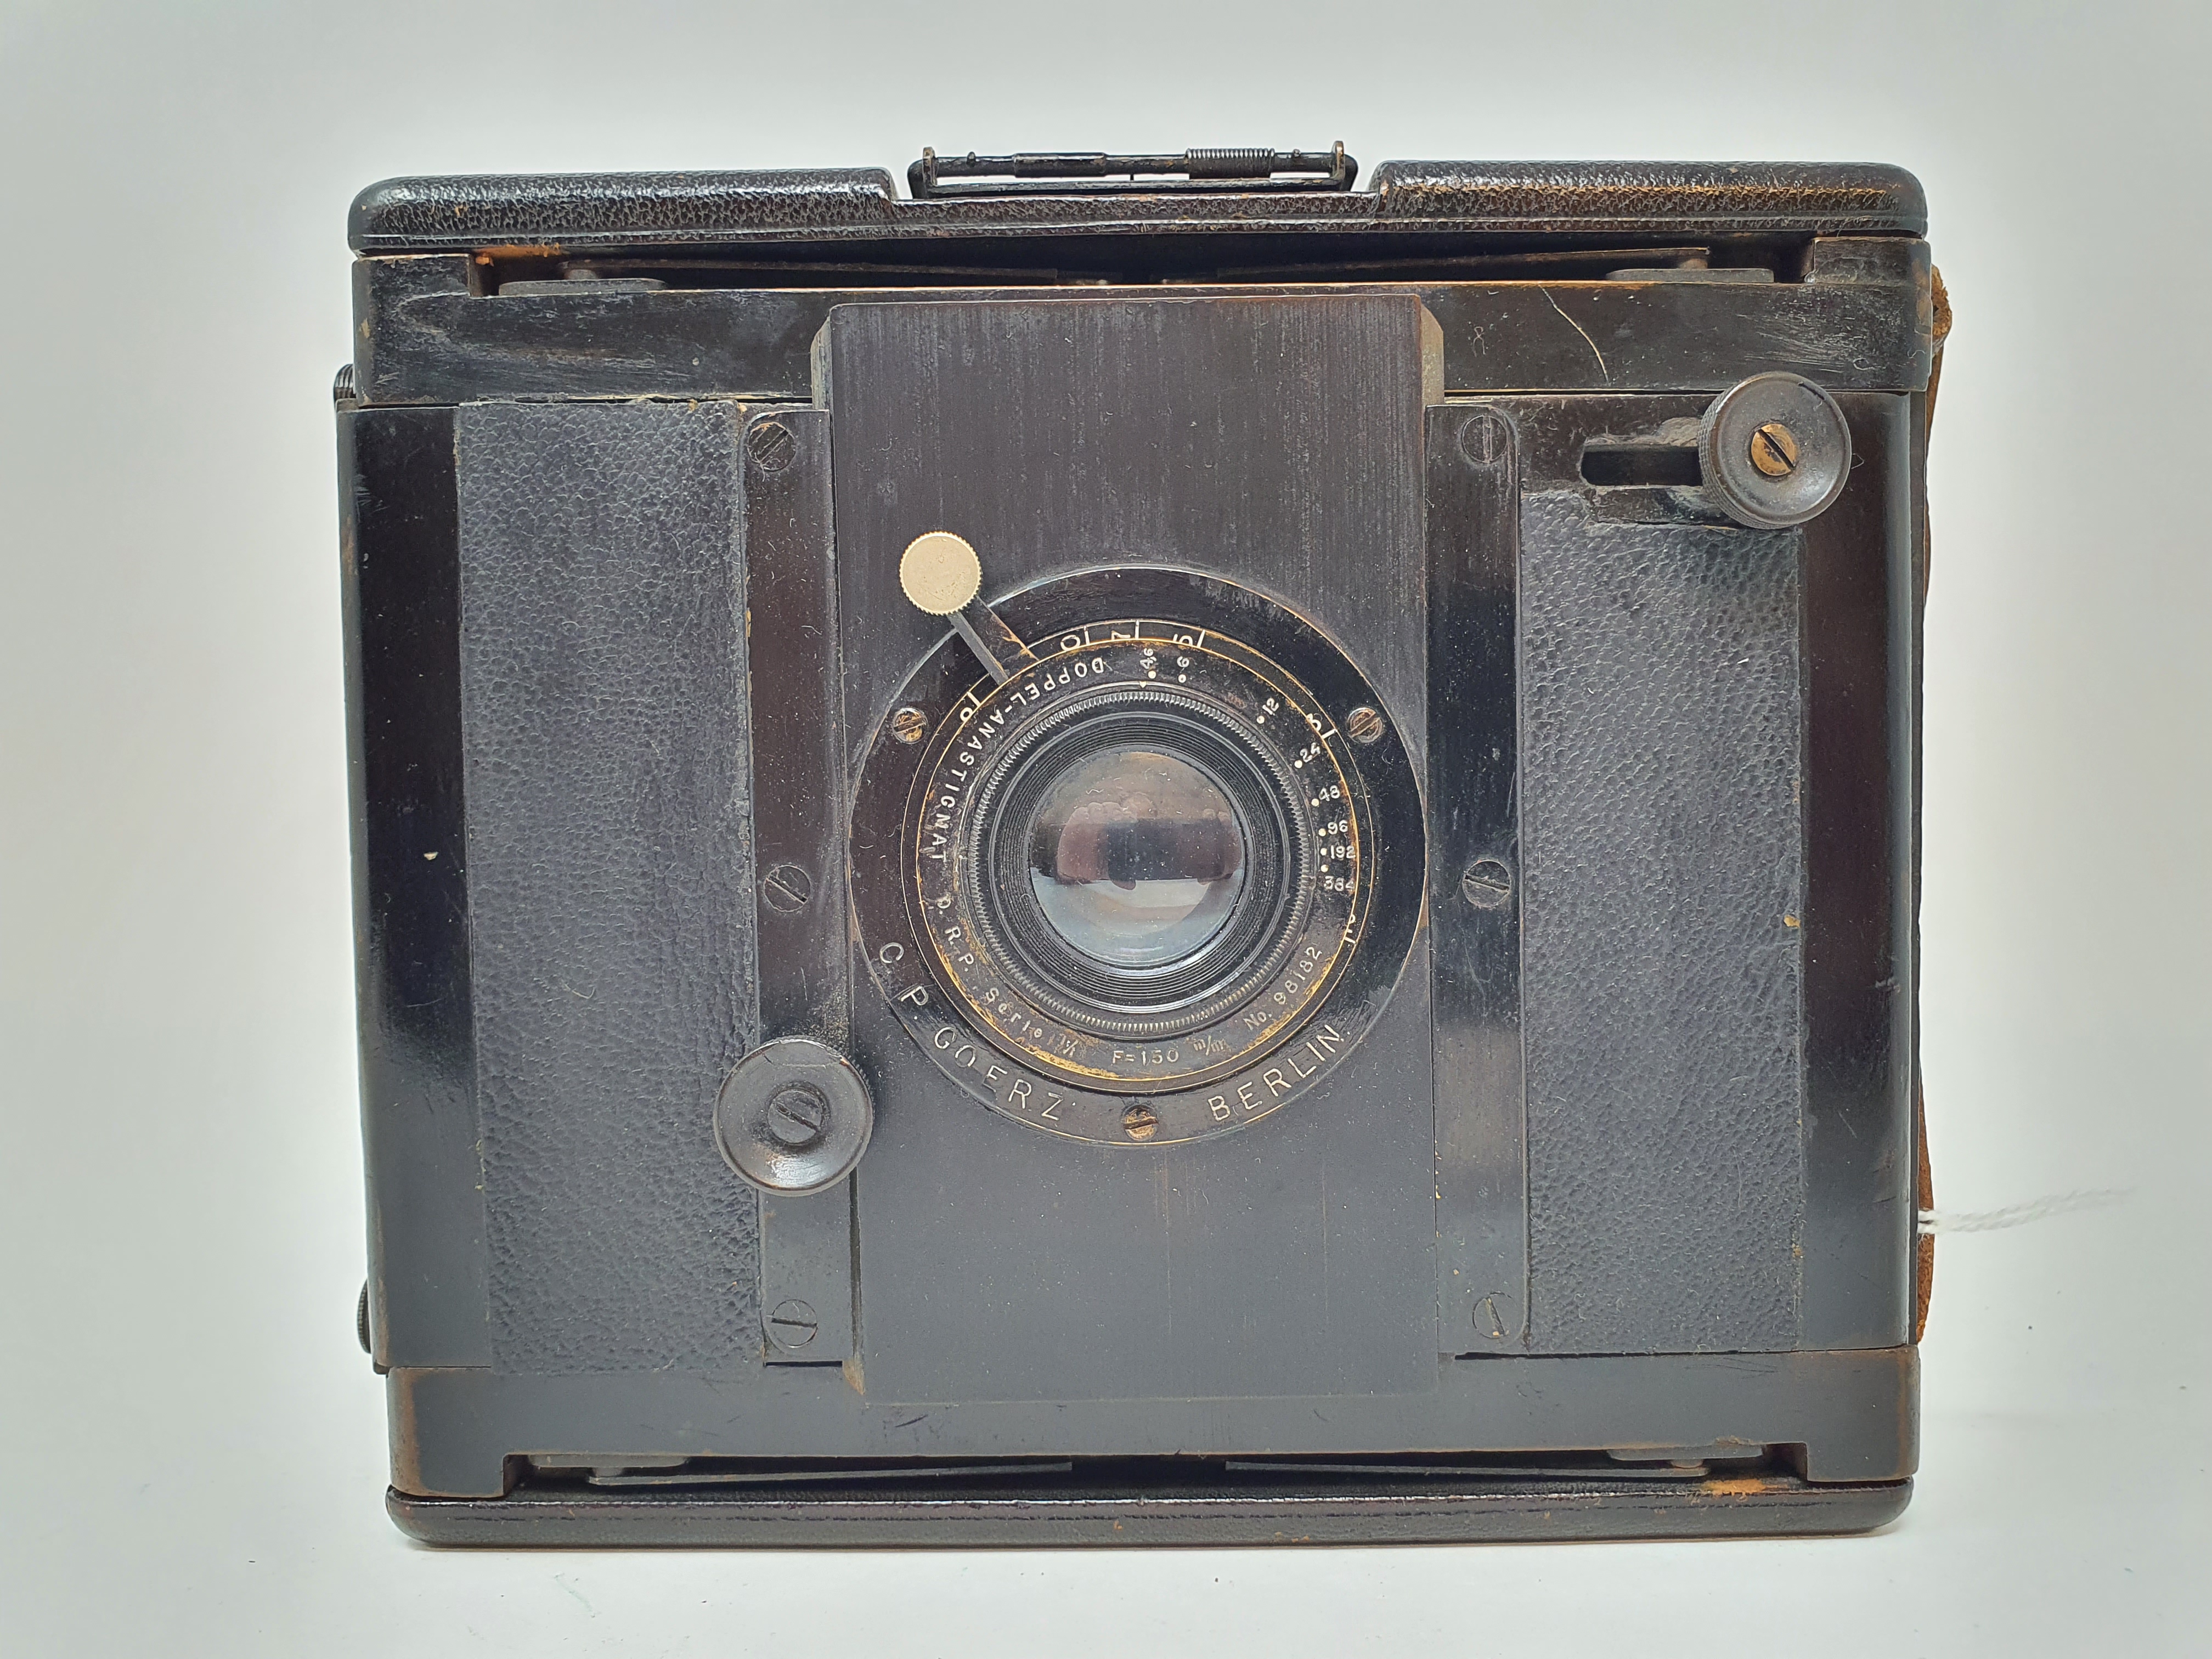 A C. P. Goerz folding camera Provenance: Part of a vast single owner collection of cameras, lenses